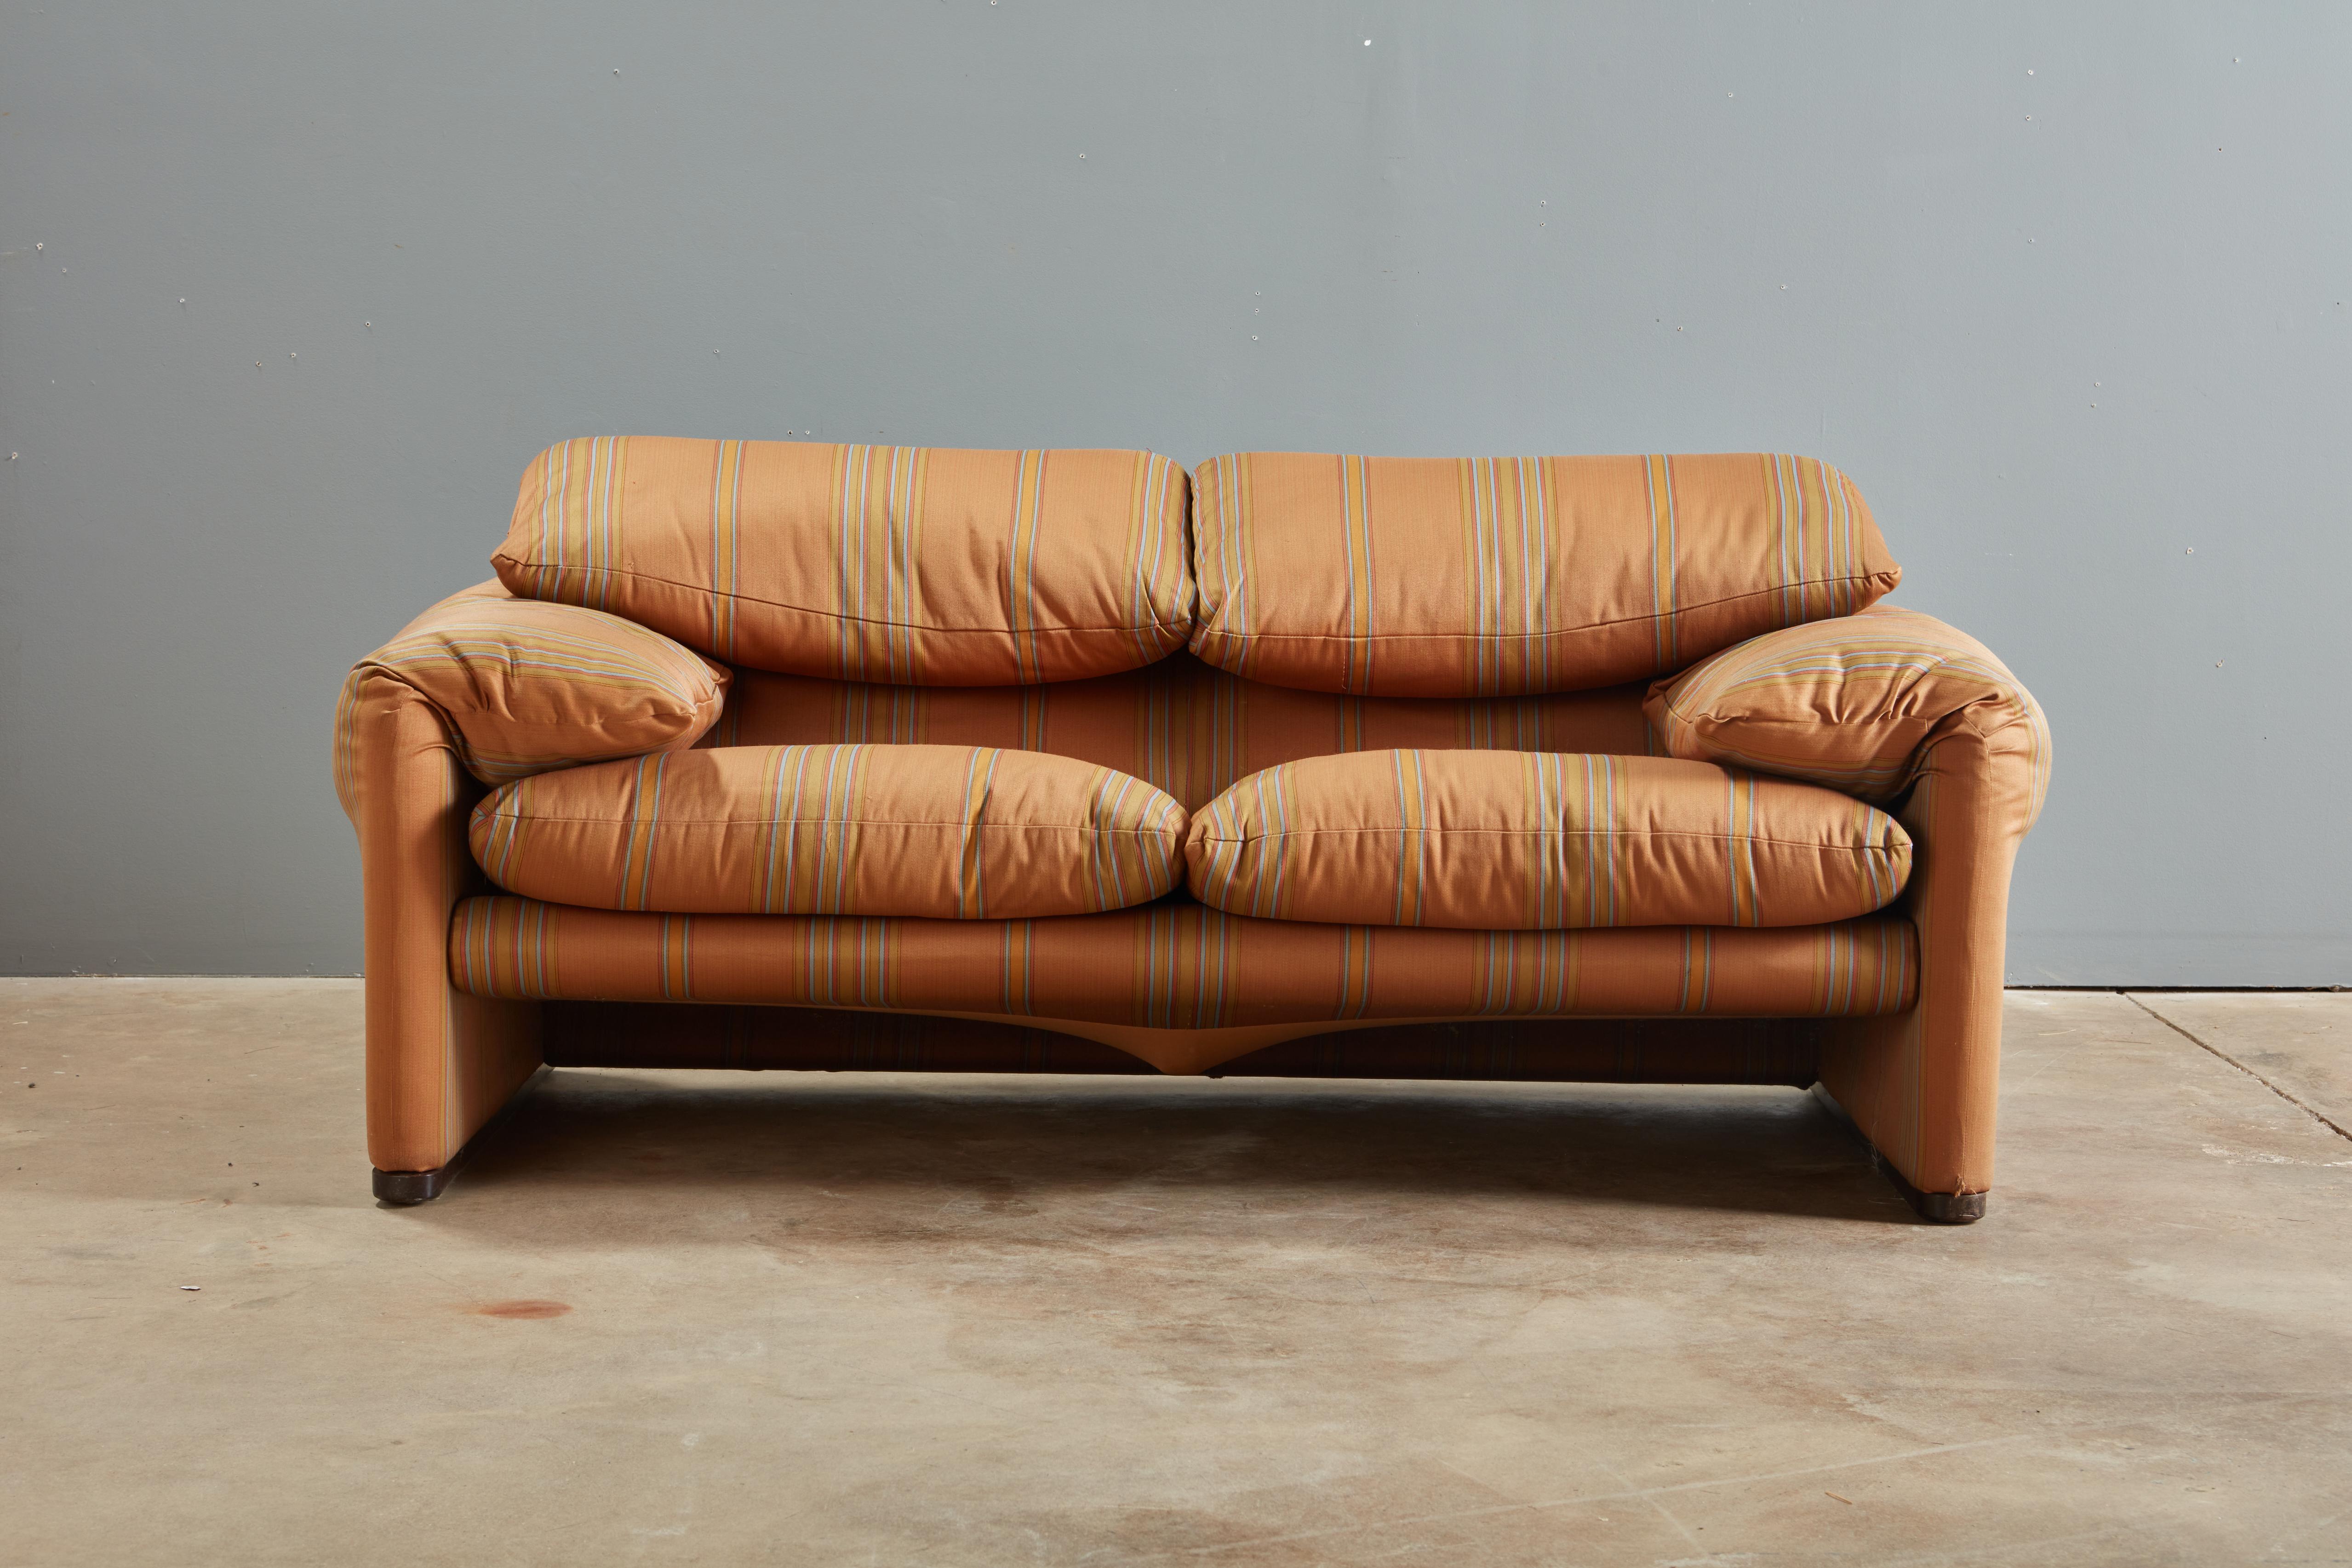 Maralunga sofa by Vico Magistretti for Cassina, 1970s in a stylish striped fabric.

Original fabric appears to be a wool blend and shows some wear. See photos for details.